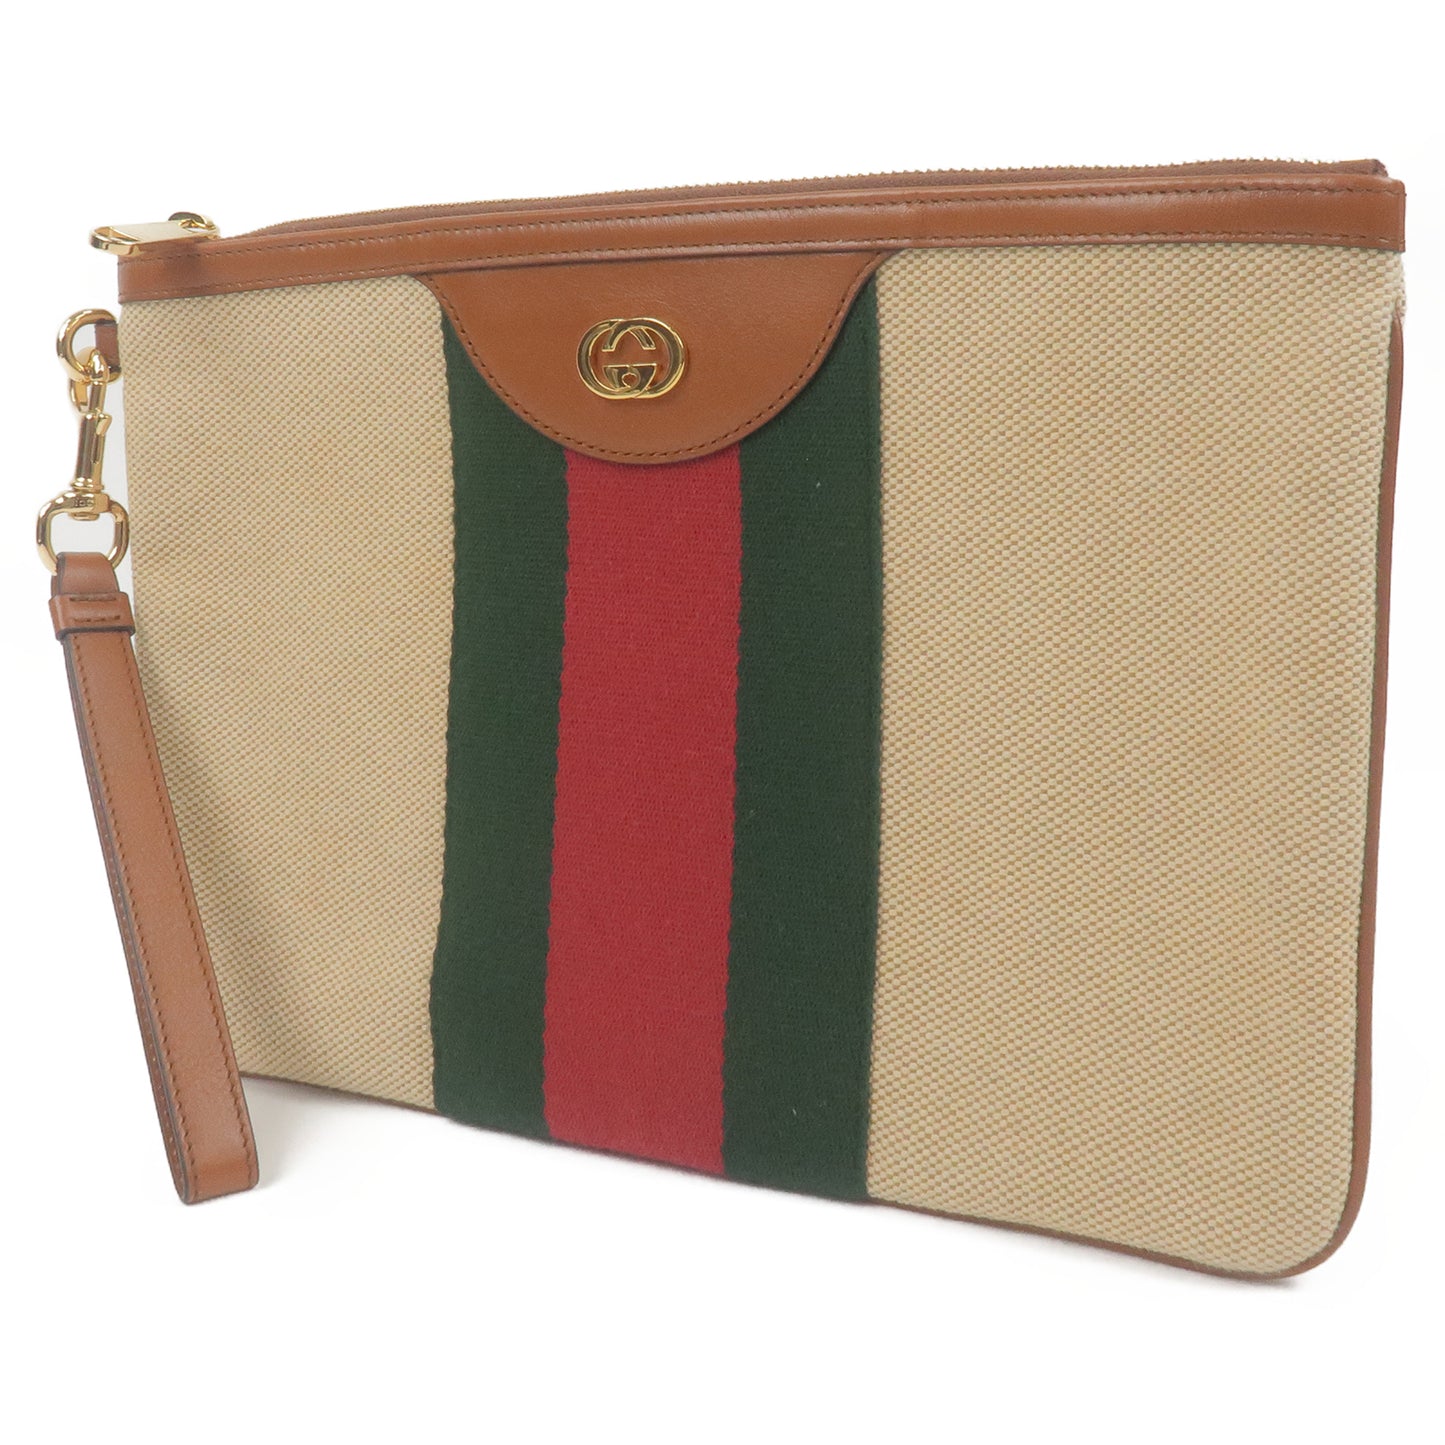 GUCCI Sherry Canvas Leather Clutch Bag Pouch Beige Brown 576053